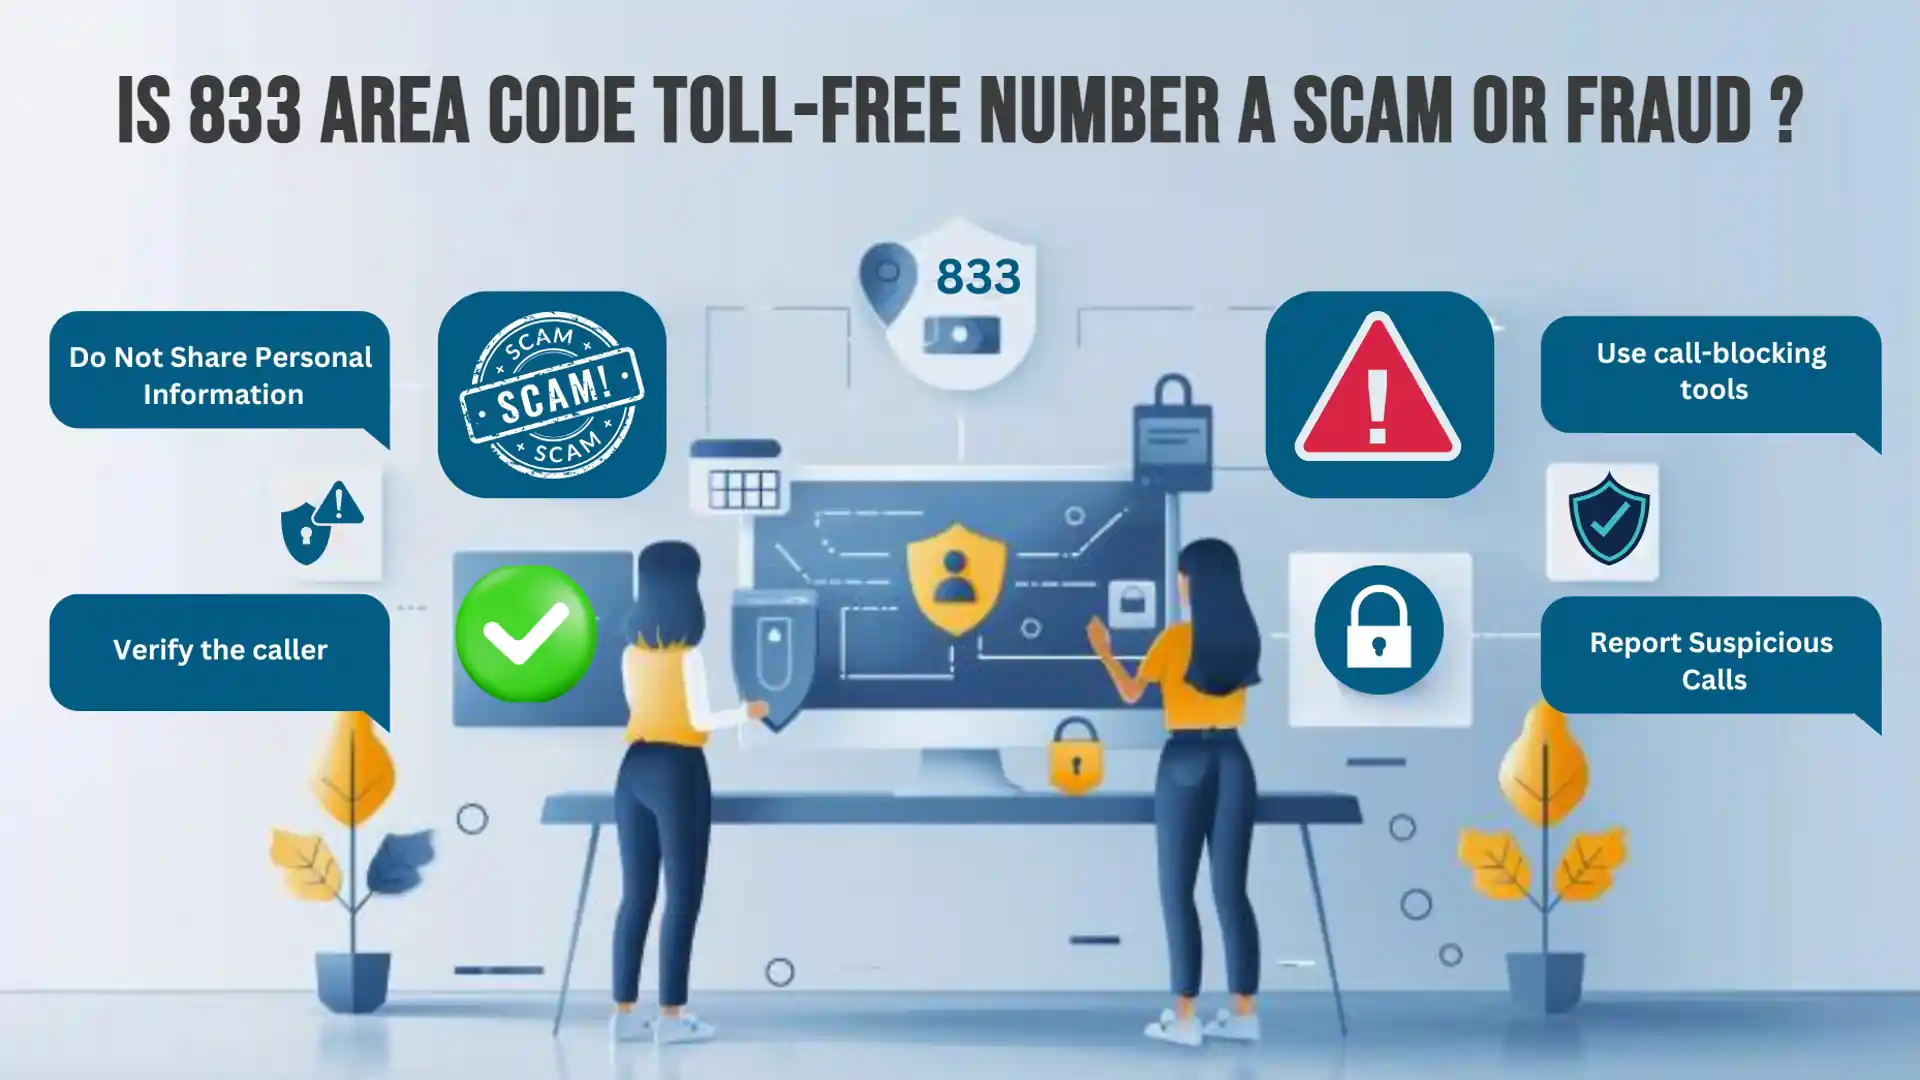 Is an 833 Area Code a scam or fraud